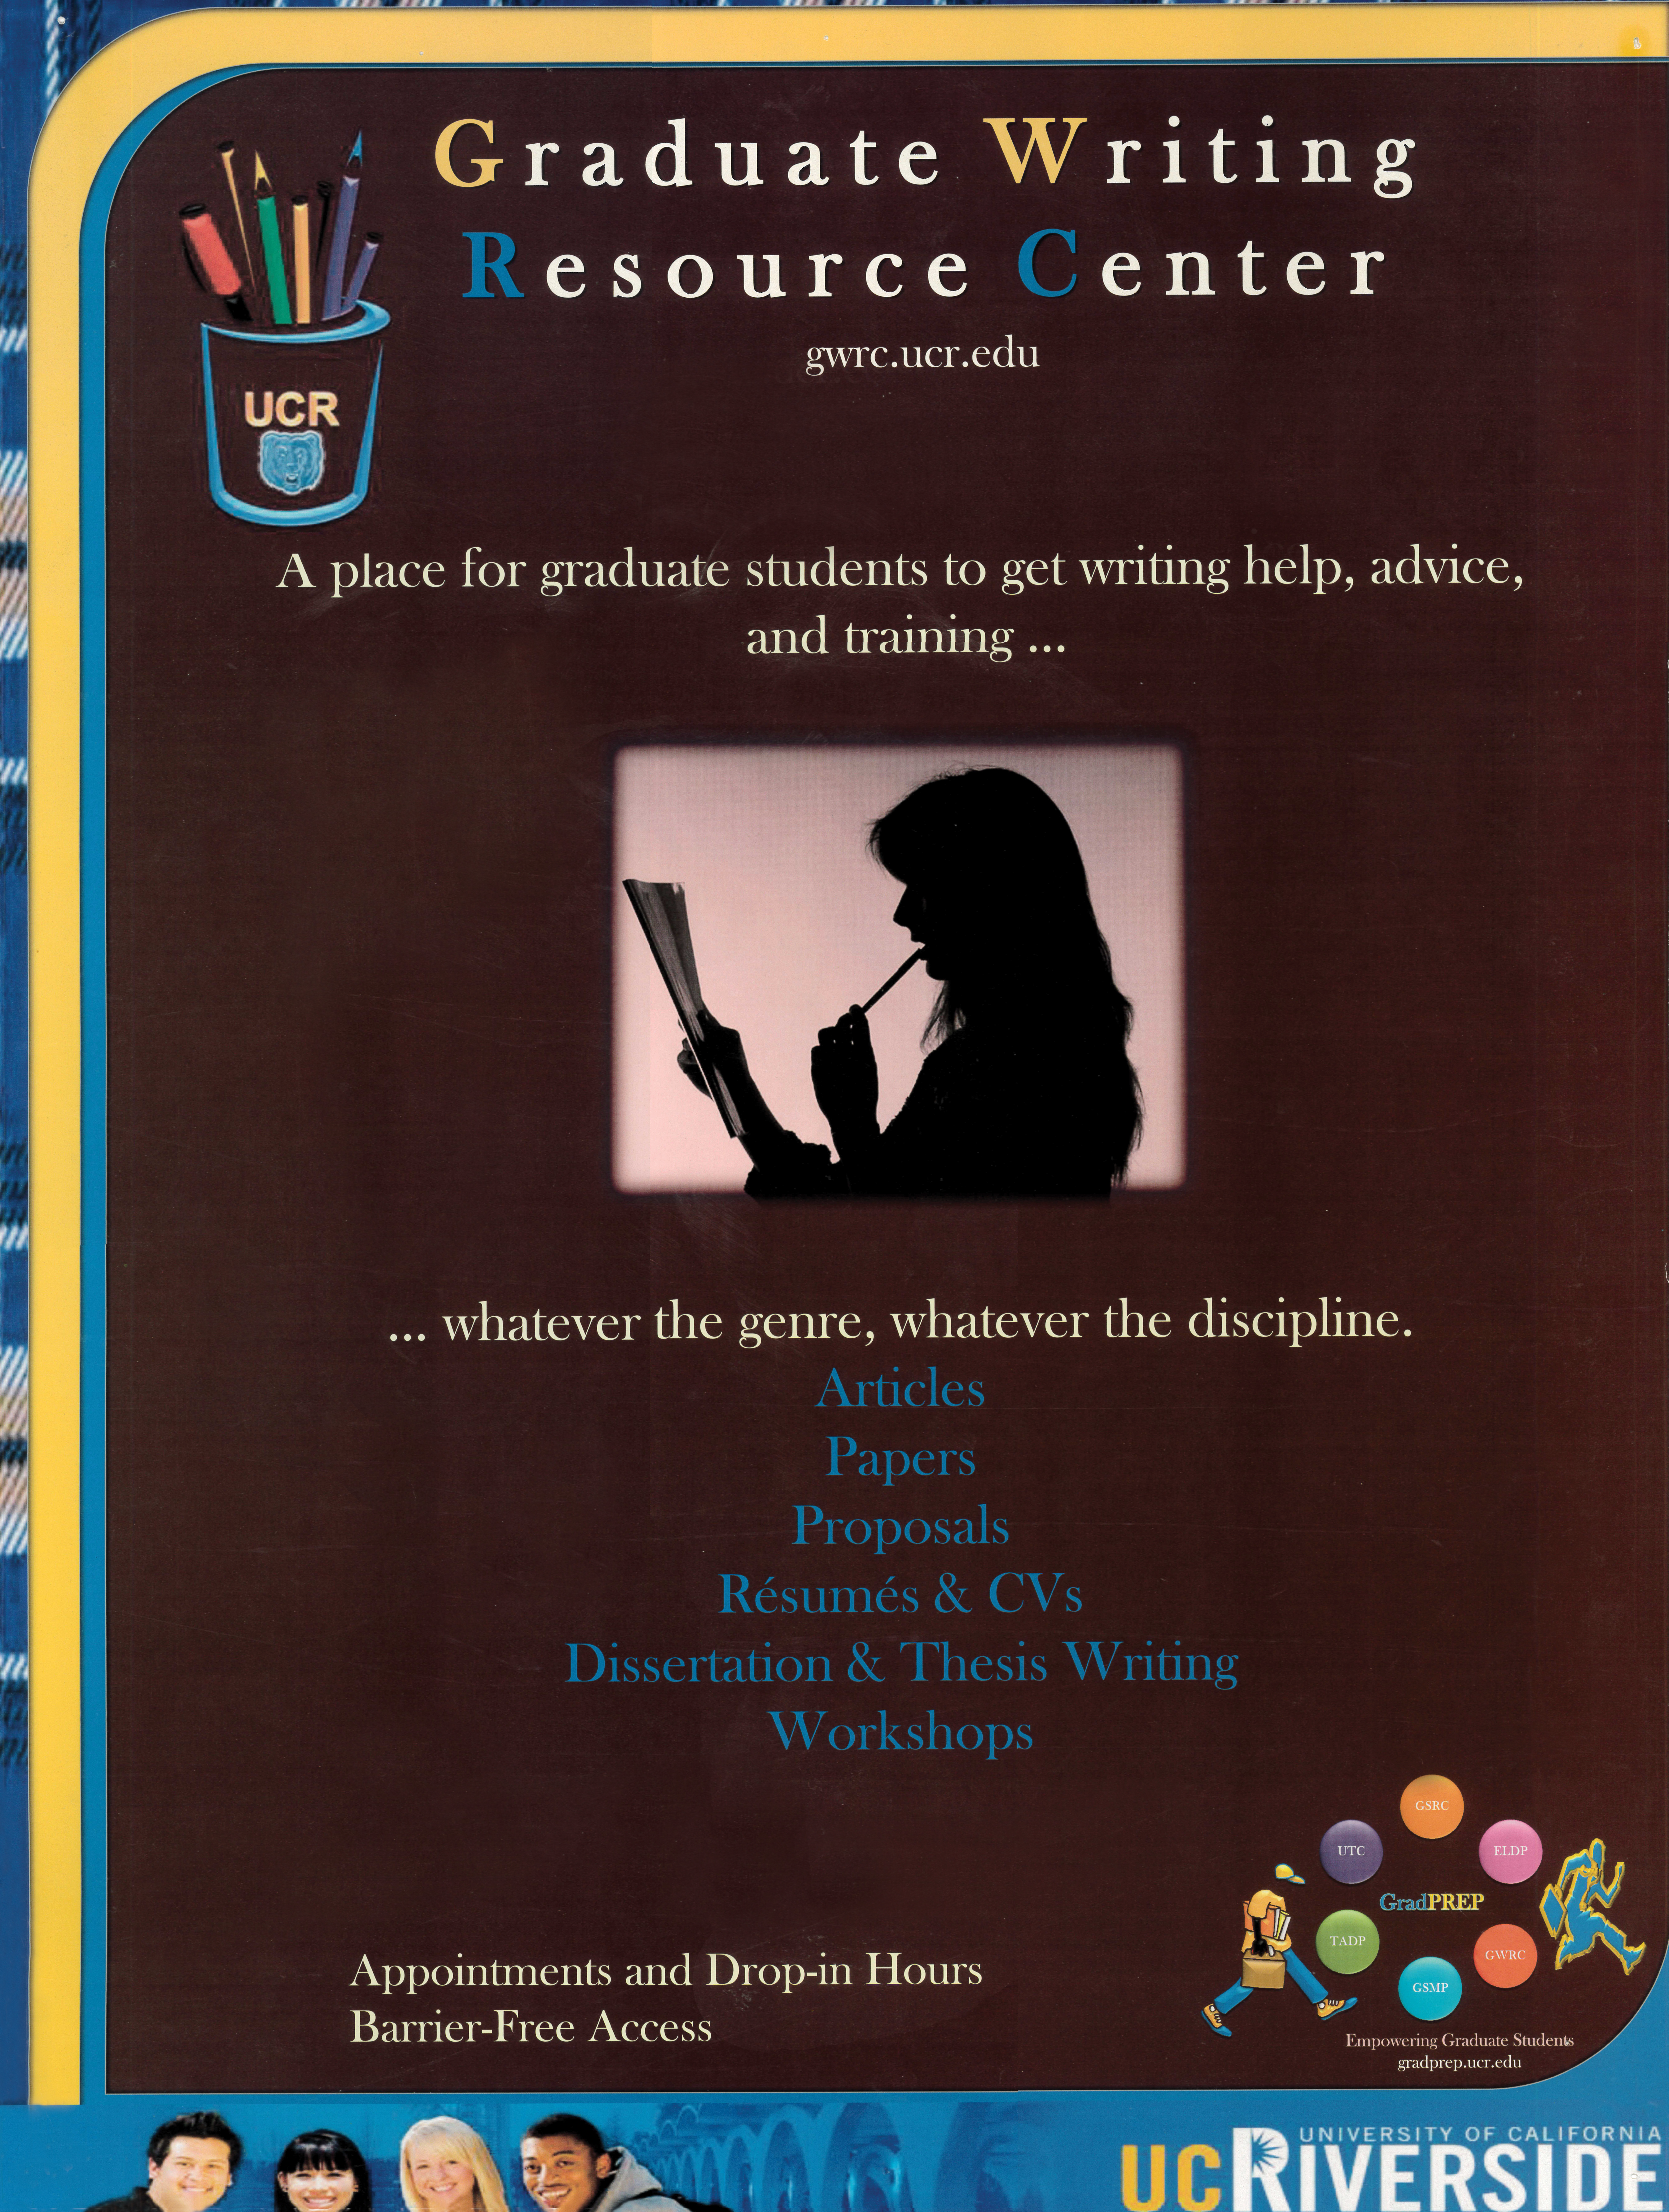 graduate_writing_resource_center_flyer.png